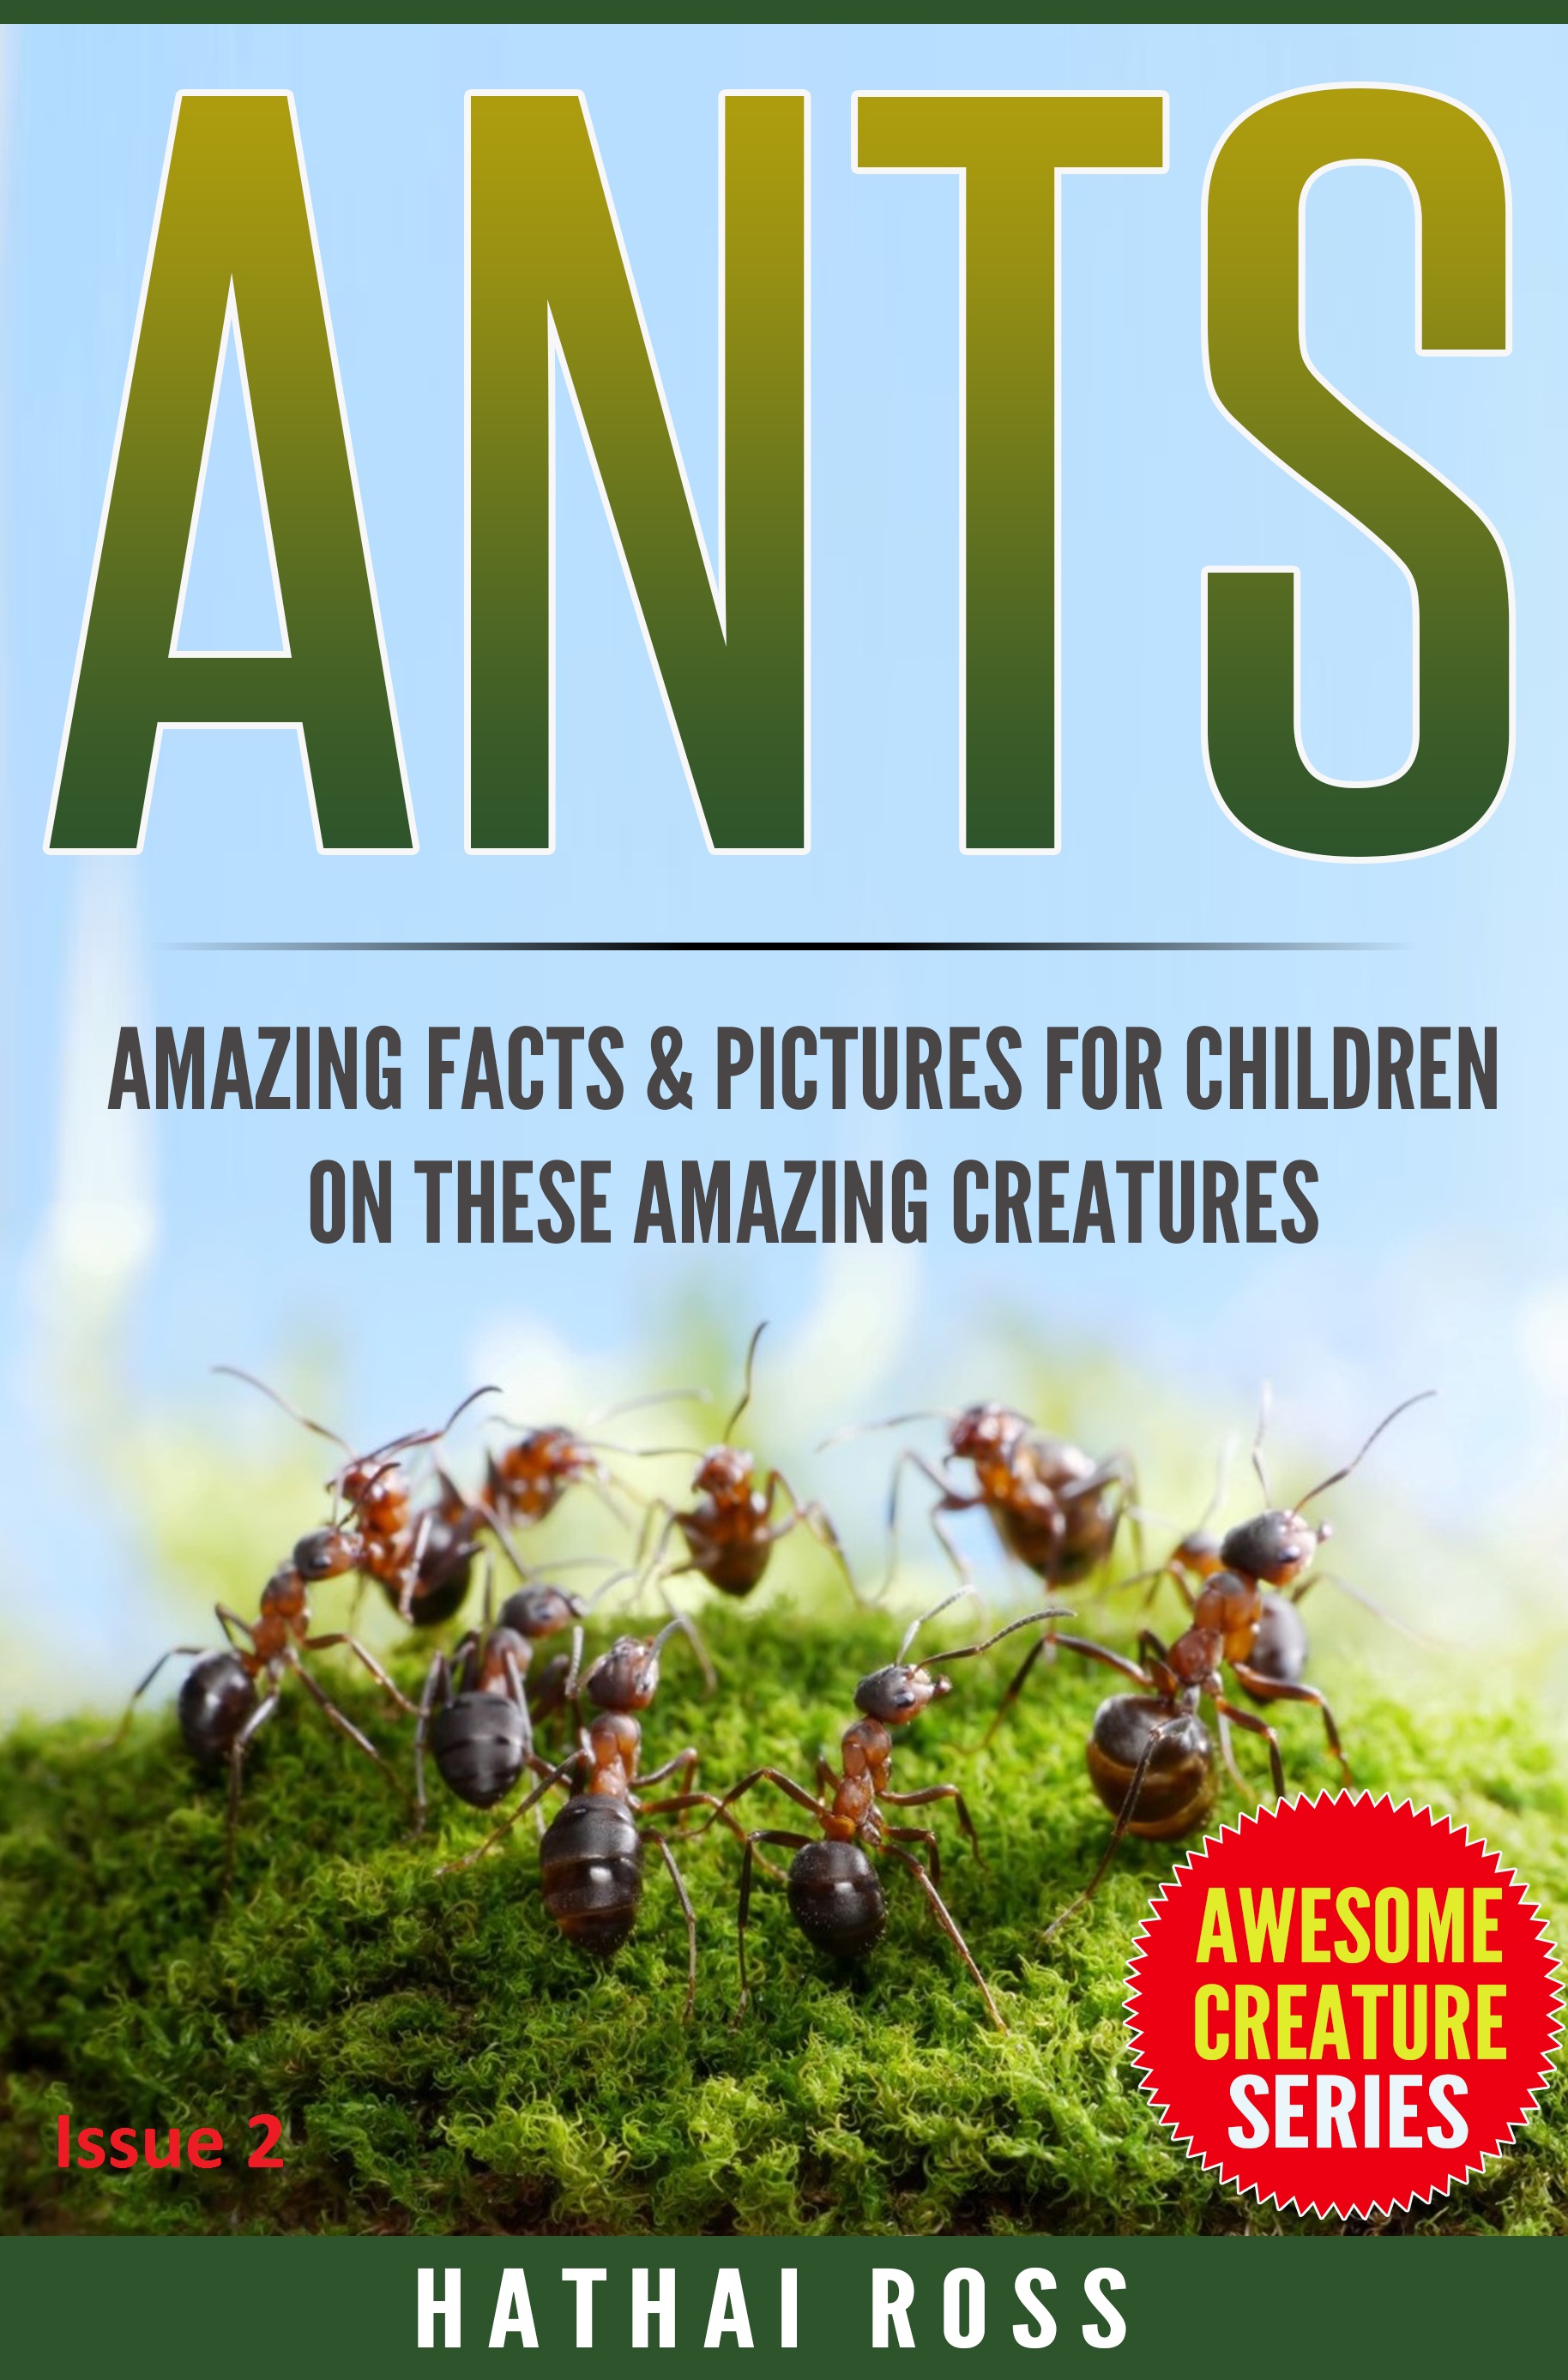 FREE: Ants: Amazing Facts & Pictures for Children on These Amazing Creatures by Hathai Ross